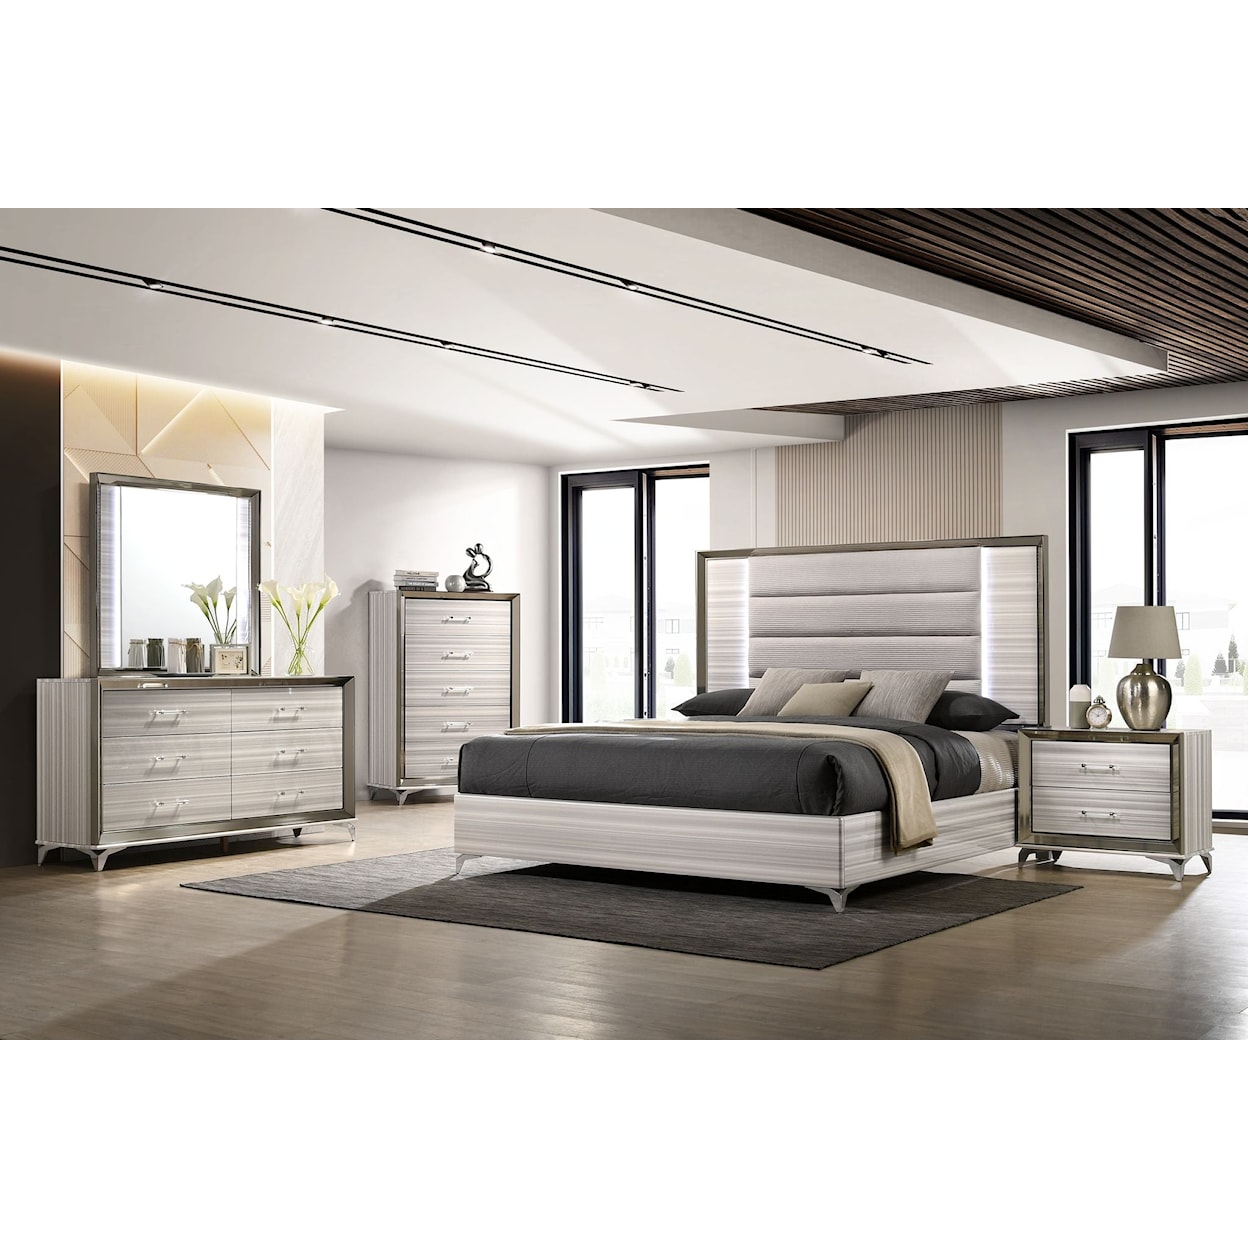 Global Furniture Zambrano King Bed with Upholstered Headboard and LED